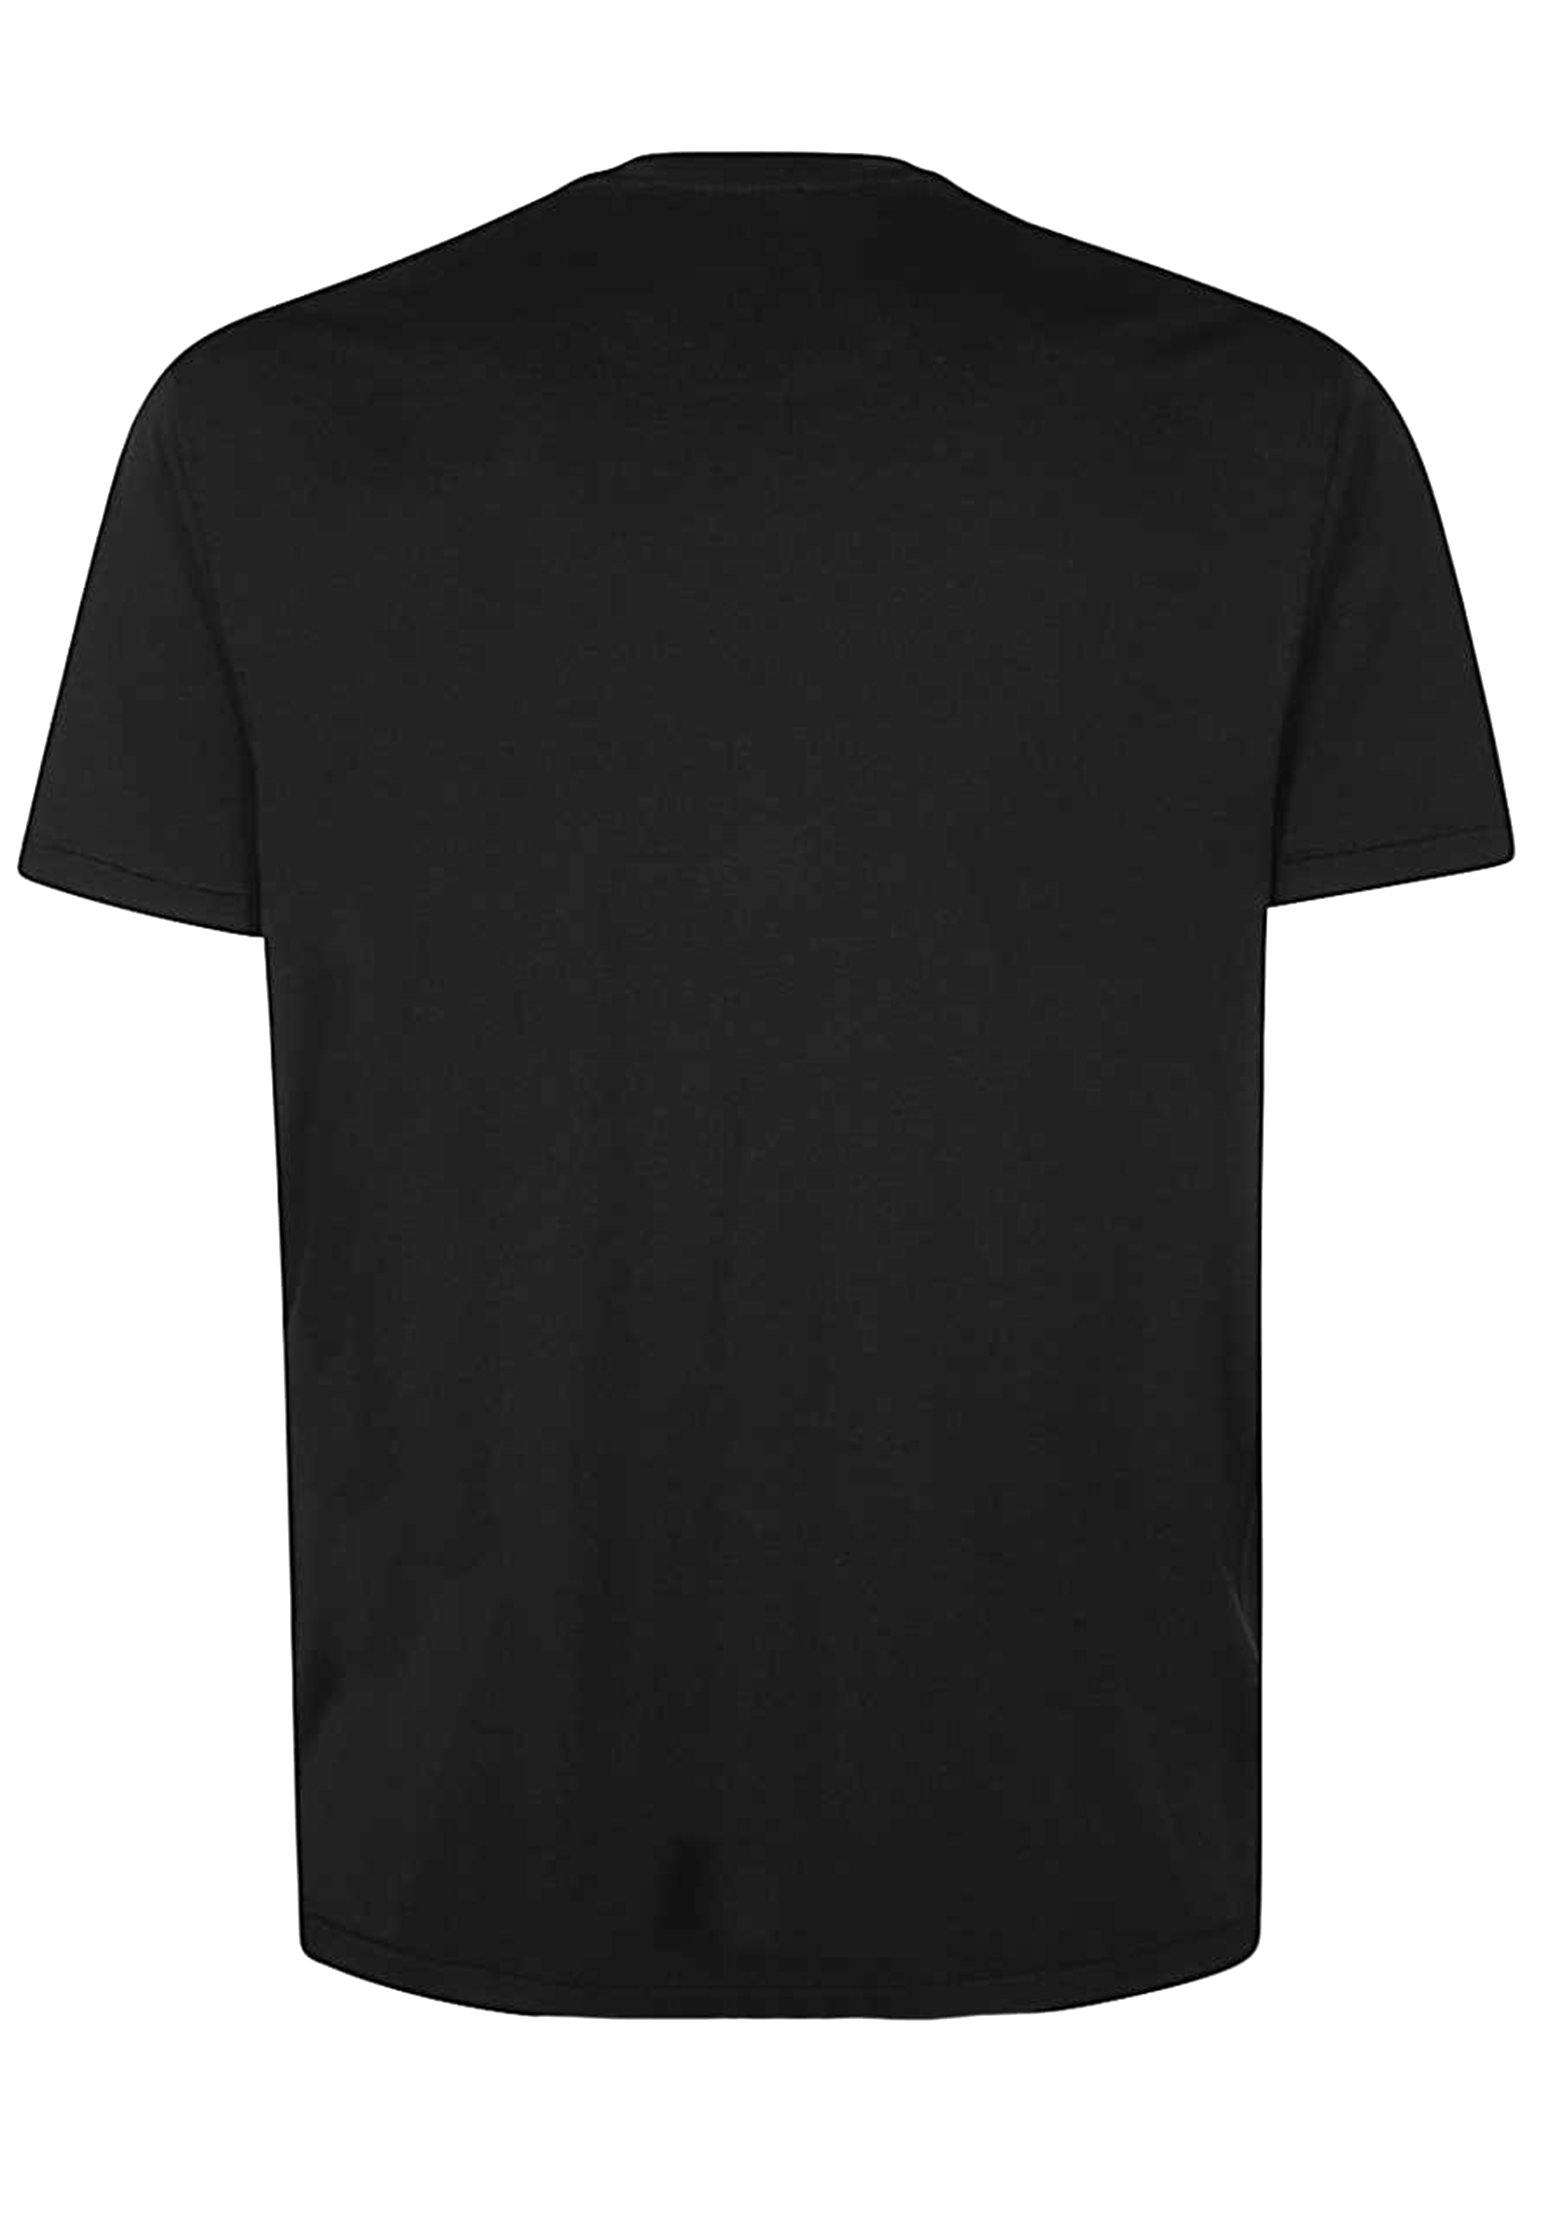 T-Shirt TOM FORD Color: black (Code: 180) in online store Allure